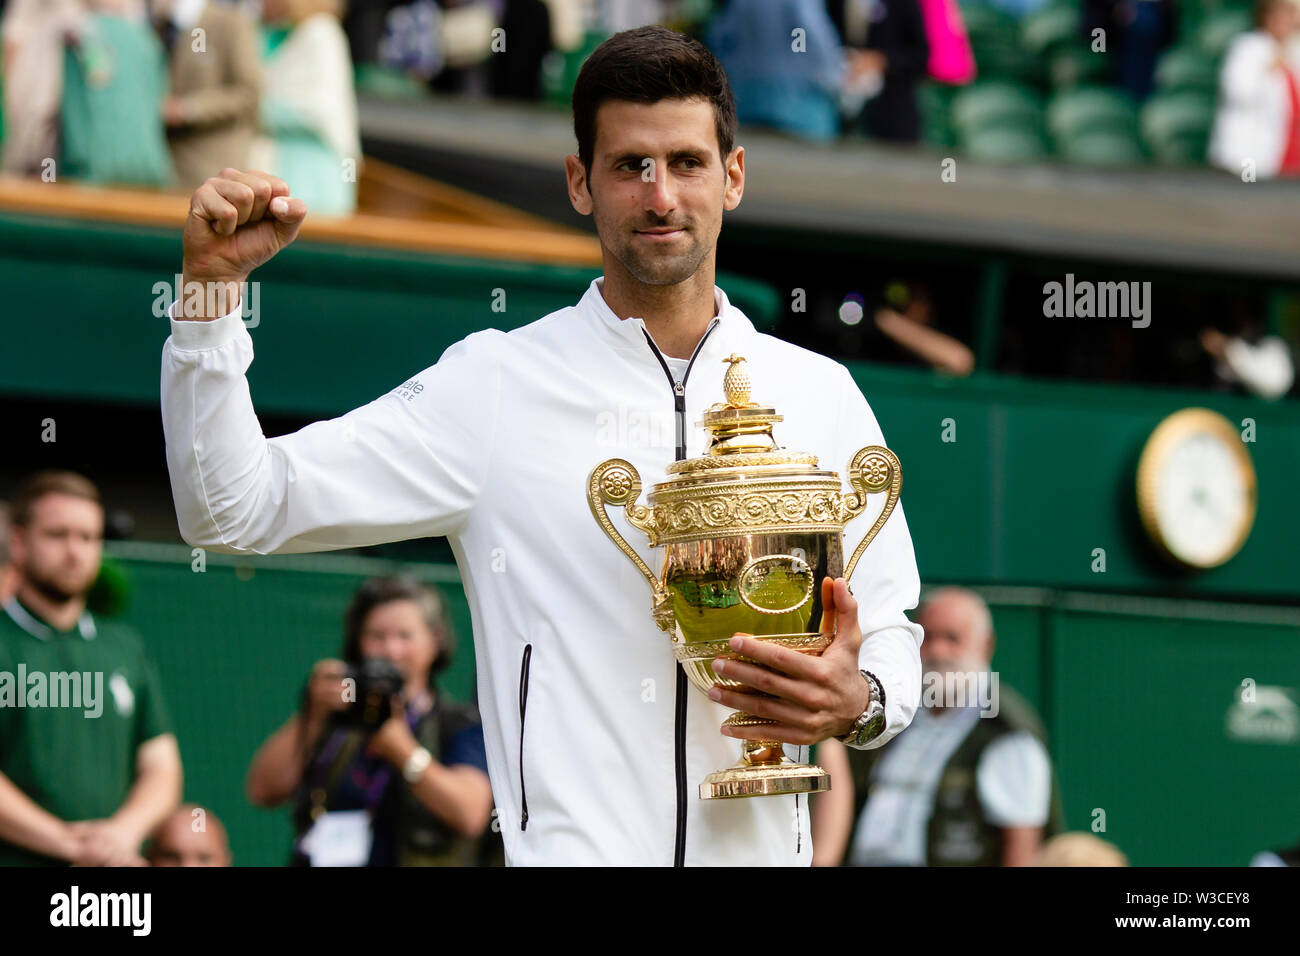 London, UK, 14th July 2019: Novak Djokovic from Serbia holds the trophy after his 2019 Wimbledon victory at the All England Lawn Tennis and Croquet Club in London. Credit: Frank Molter/Alamy Live news Stock Photo